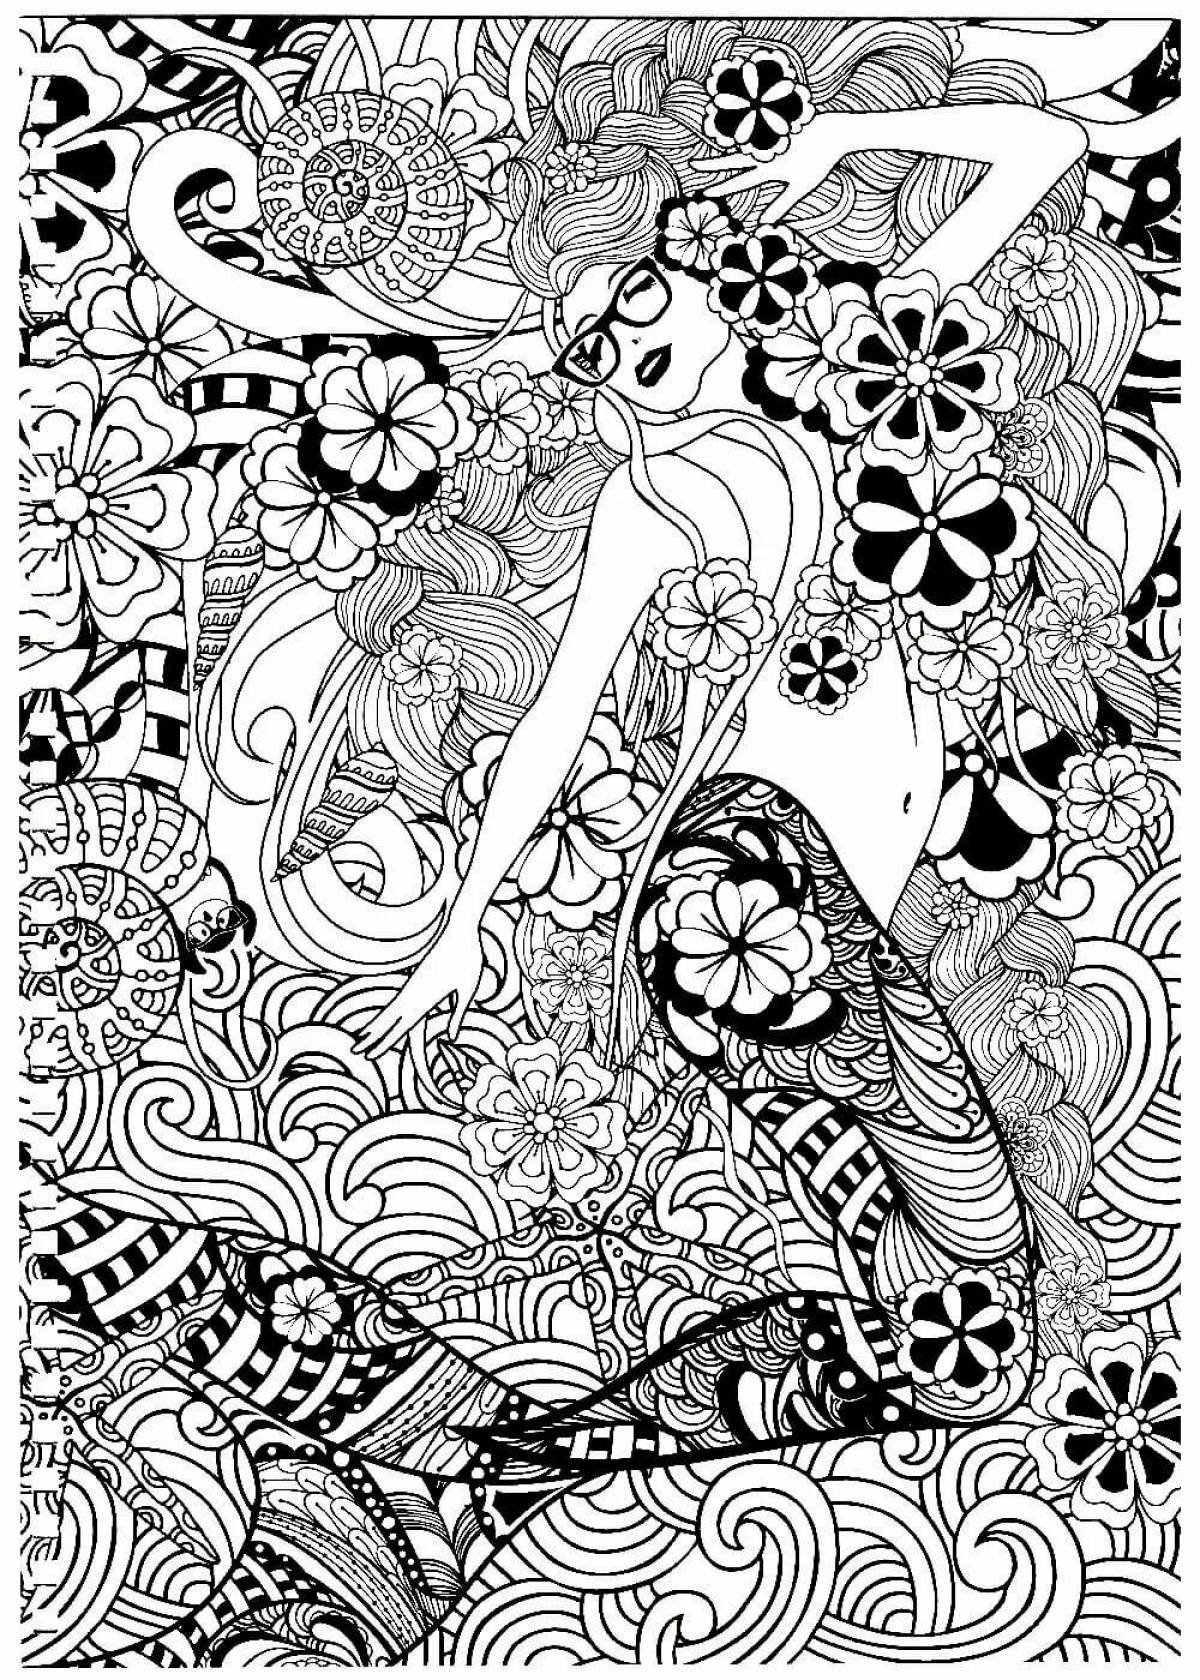 Adorable coloring book modern for adults